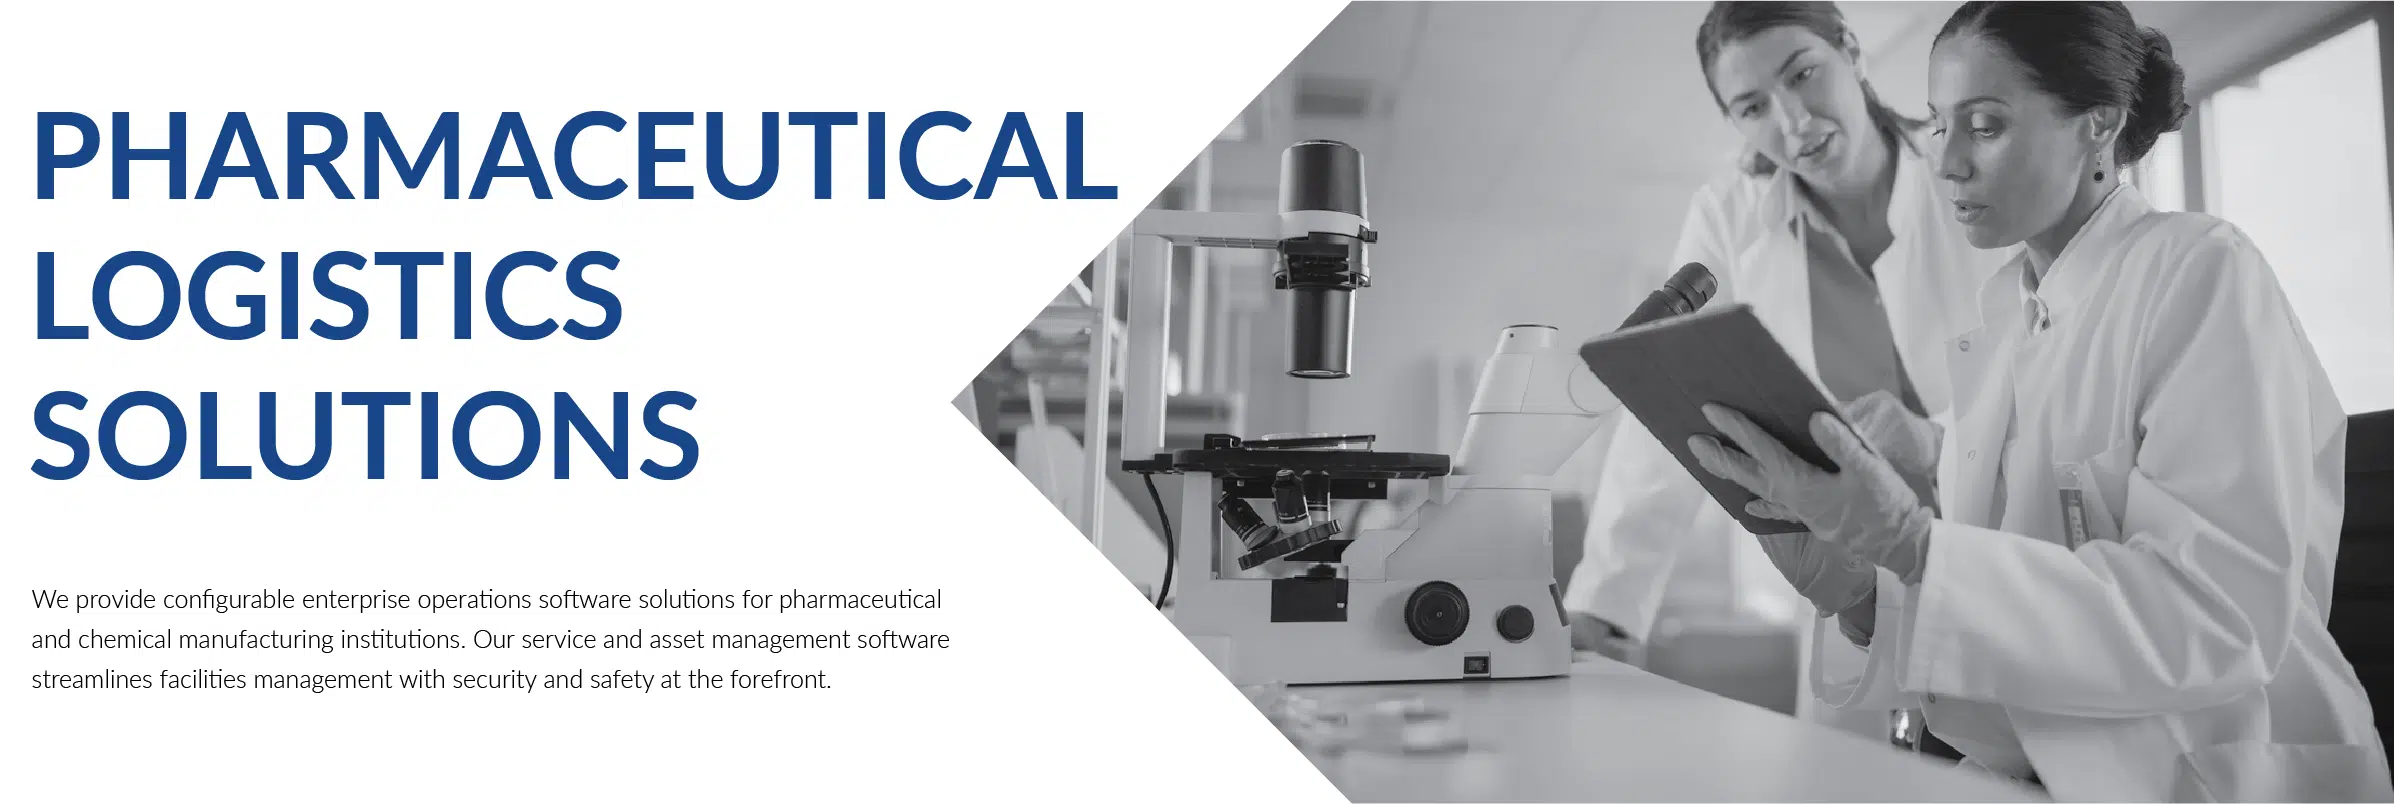 We provide configurable enterprise operations software solutions for pharmaceutical and chemical manufacturing
institutions. Our service and asset management software streamlines facilities management with security and safety at the forefront.